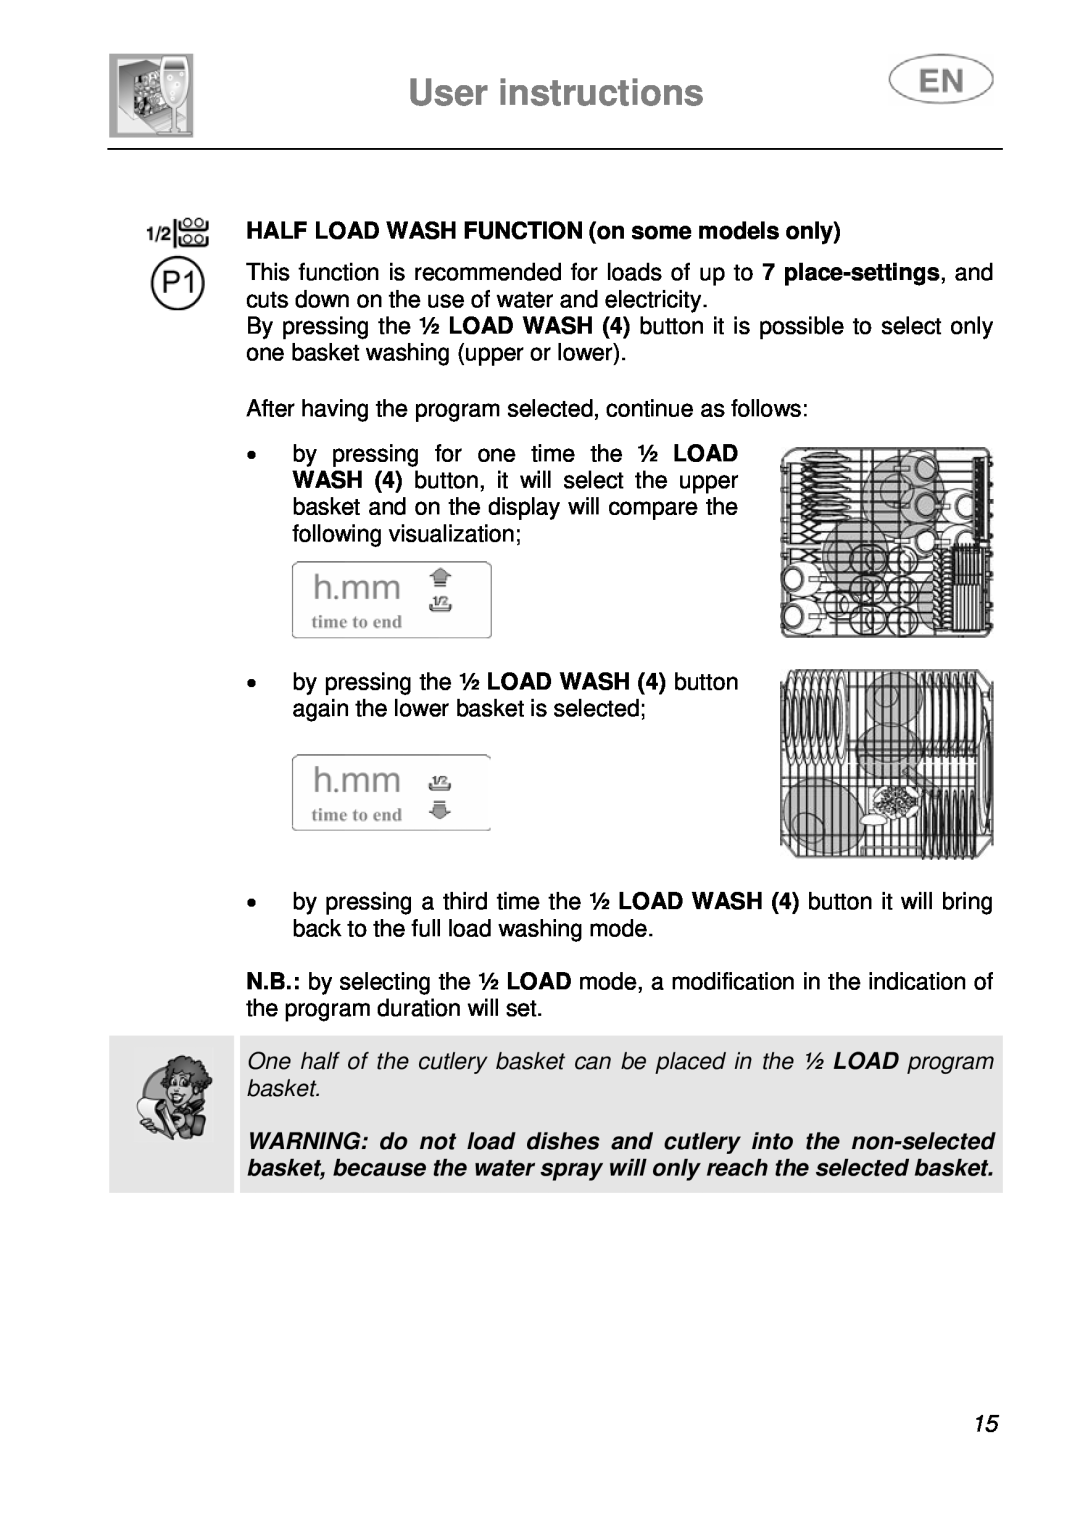 Smeg LSA643XPQ instruction manual User instructions, HALF LOAD WASH FUNCTION on some models only 